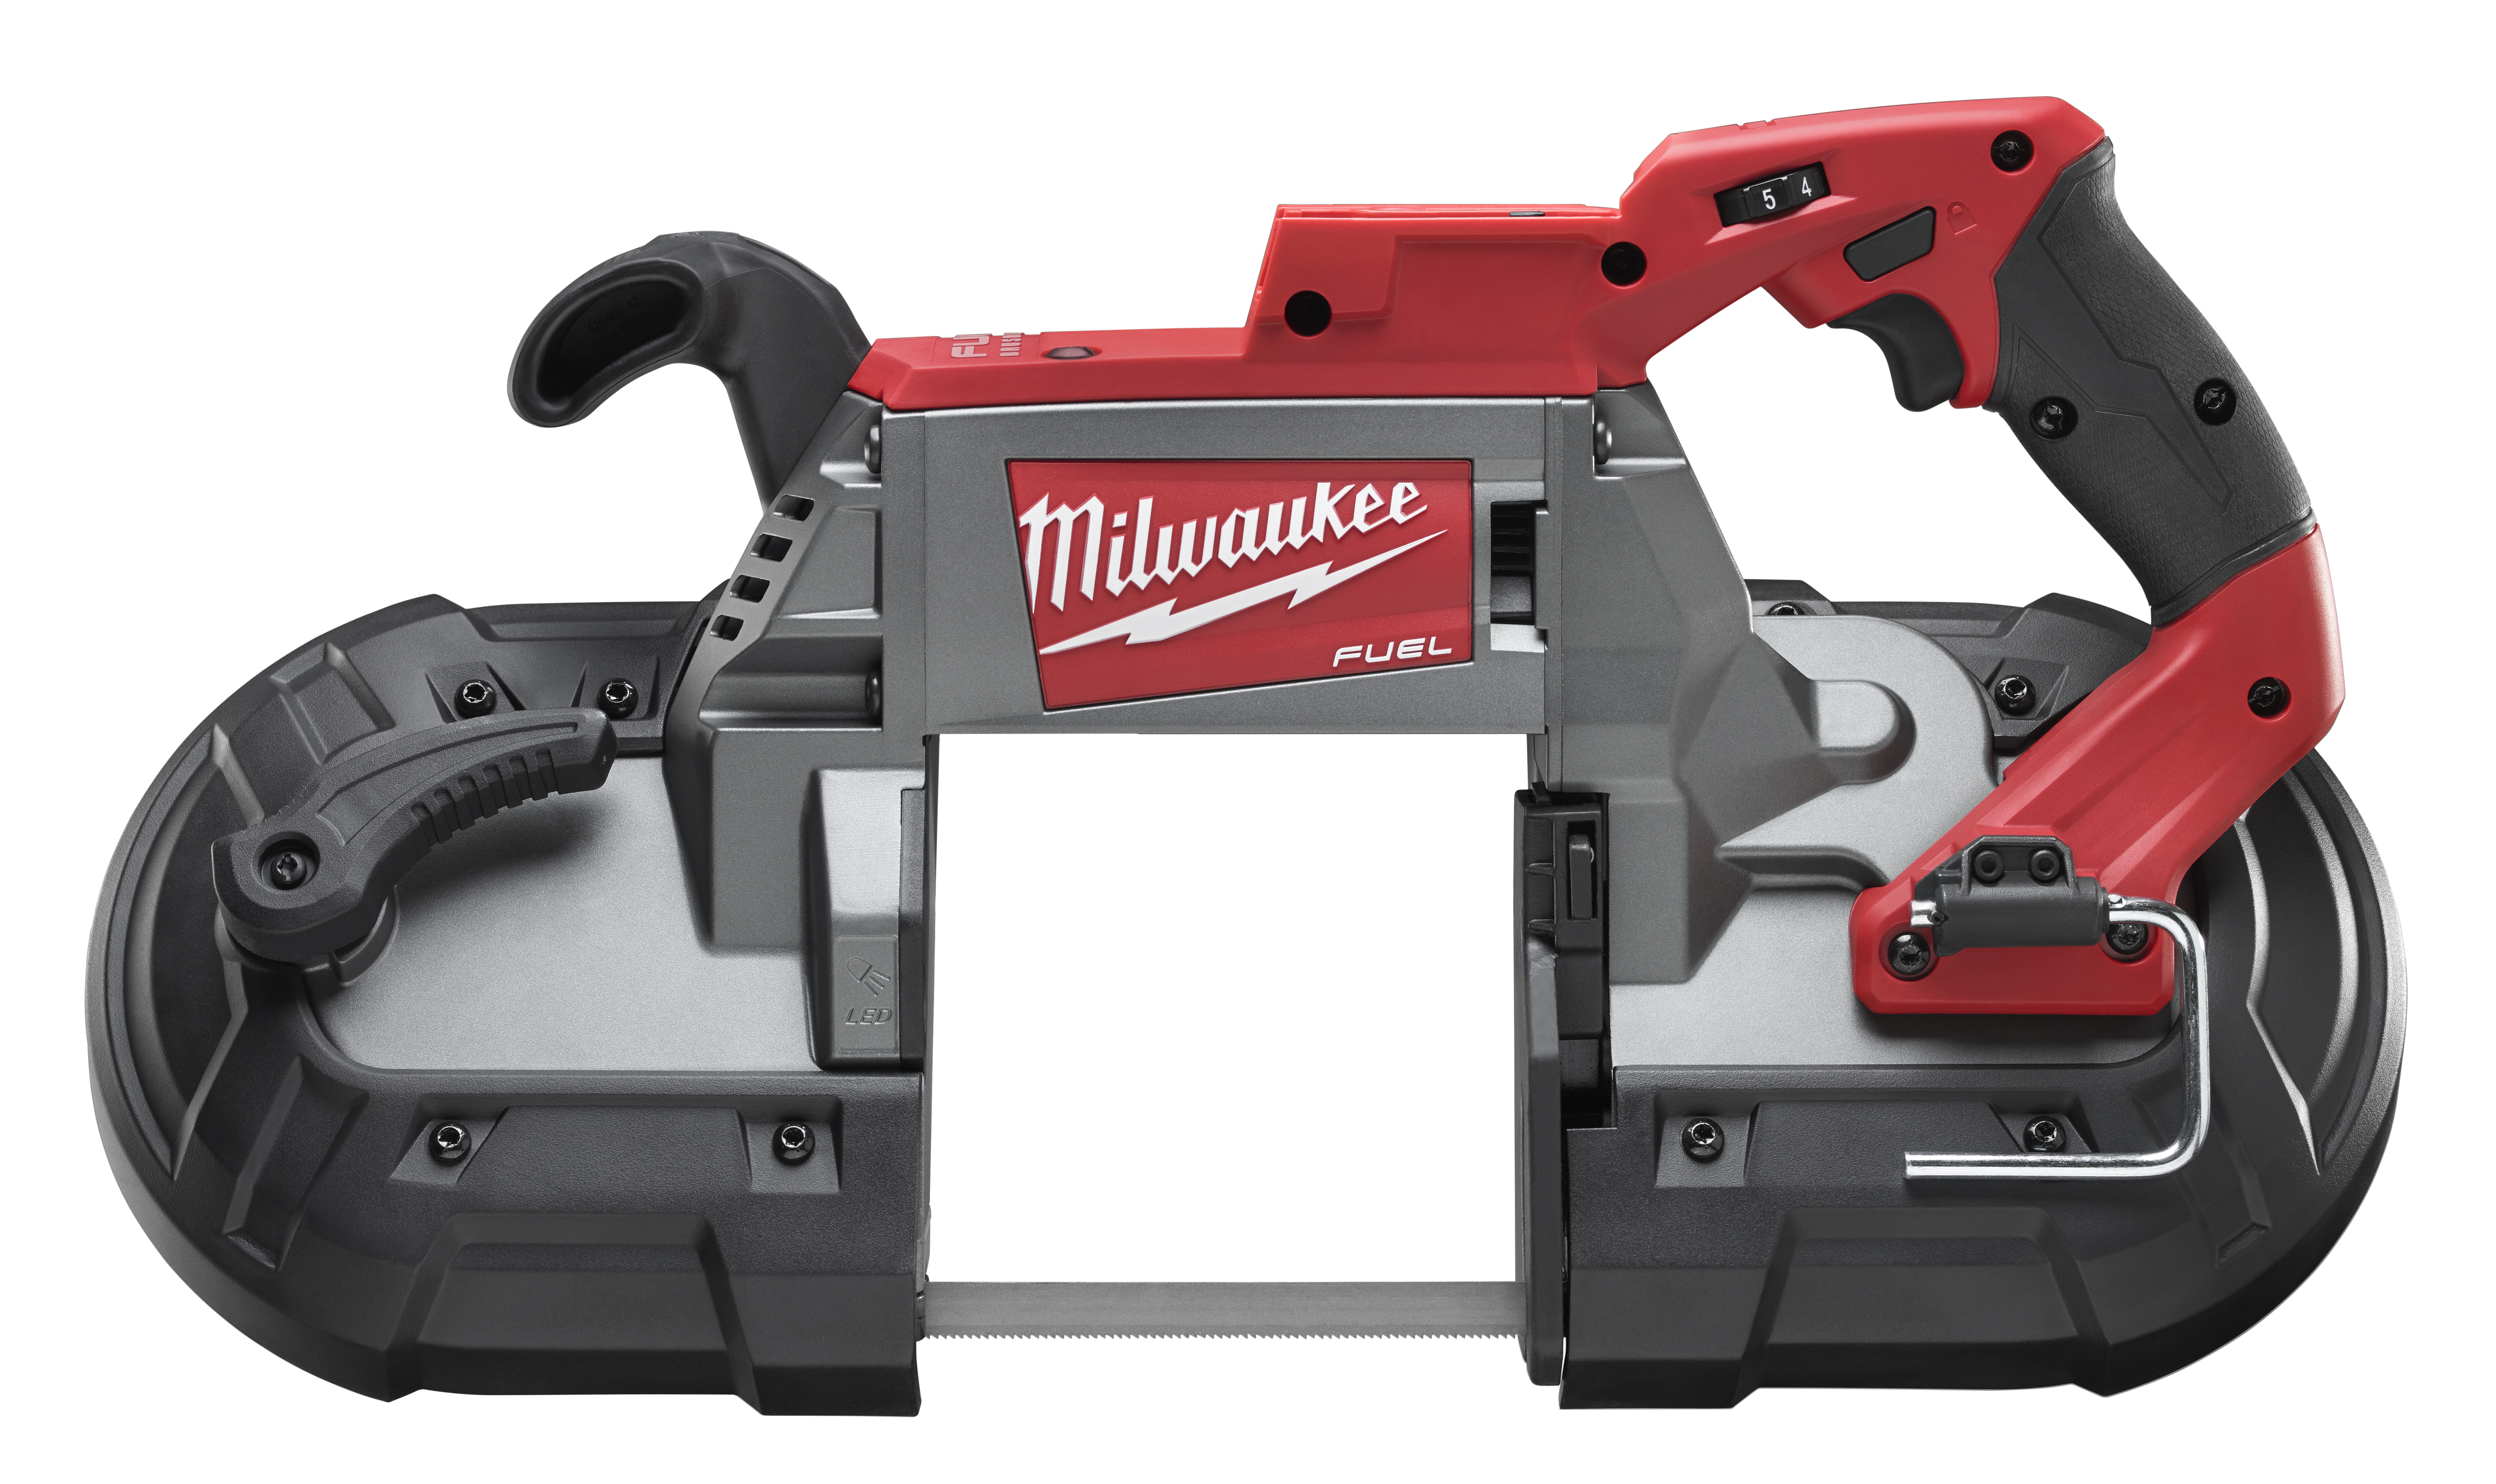 M18 FUEL 18 Volt Lithium-Ion Cordless Deep Cut Band Saw - Tool Only